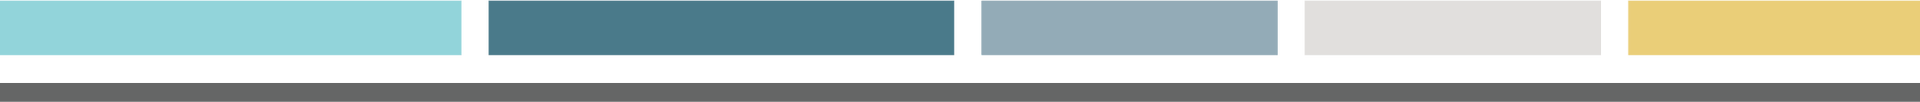 Color Palette- AnchorWell, bright blue, deep jade, blue/grey, ivory, buttercup yellow.